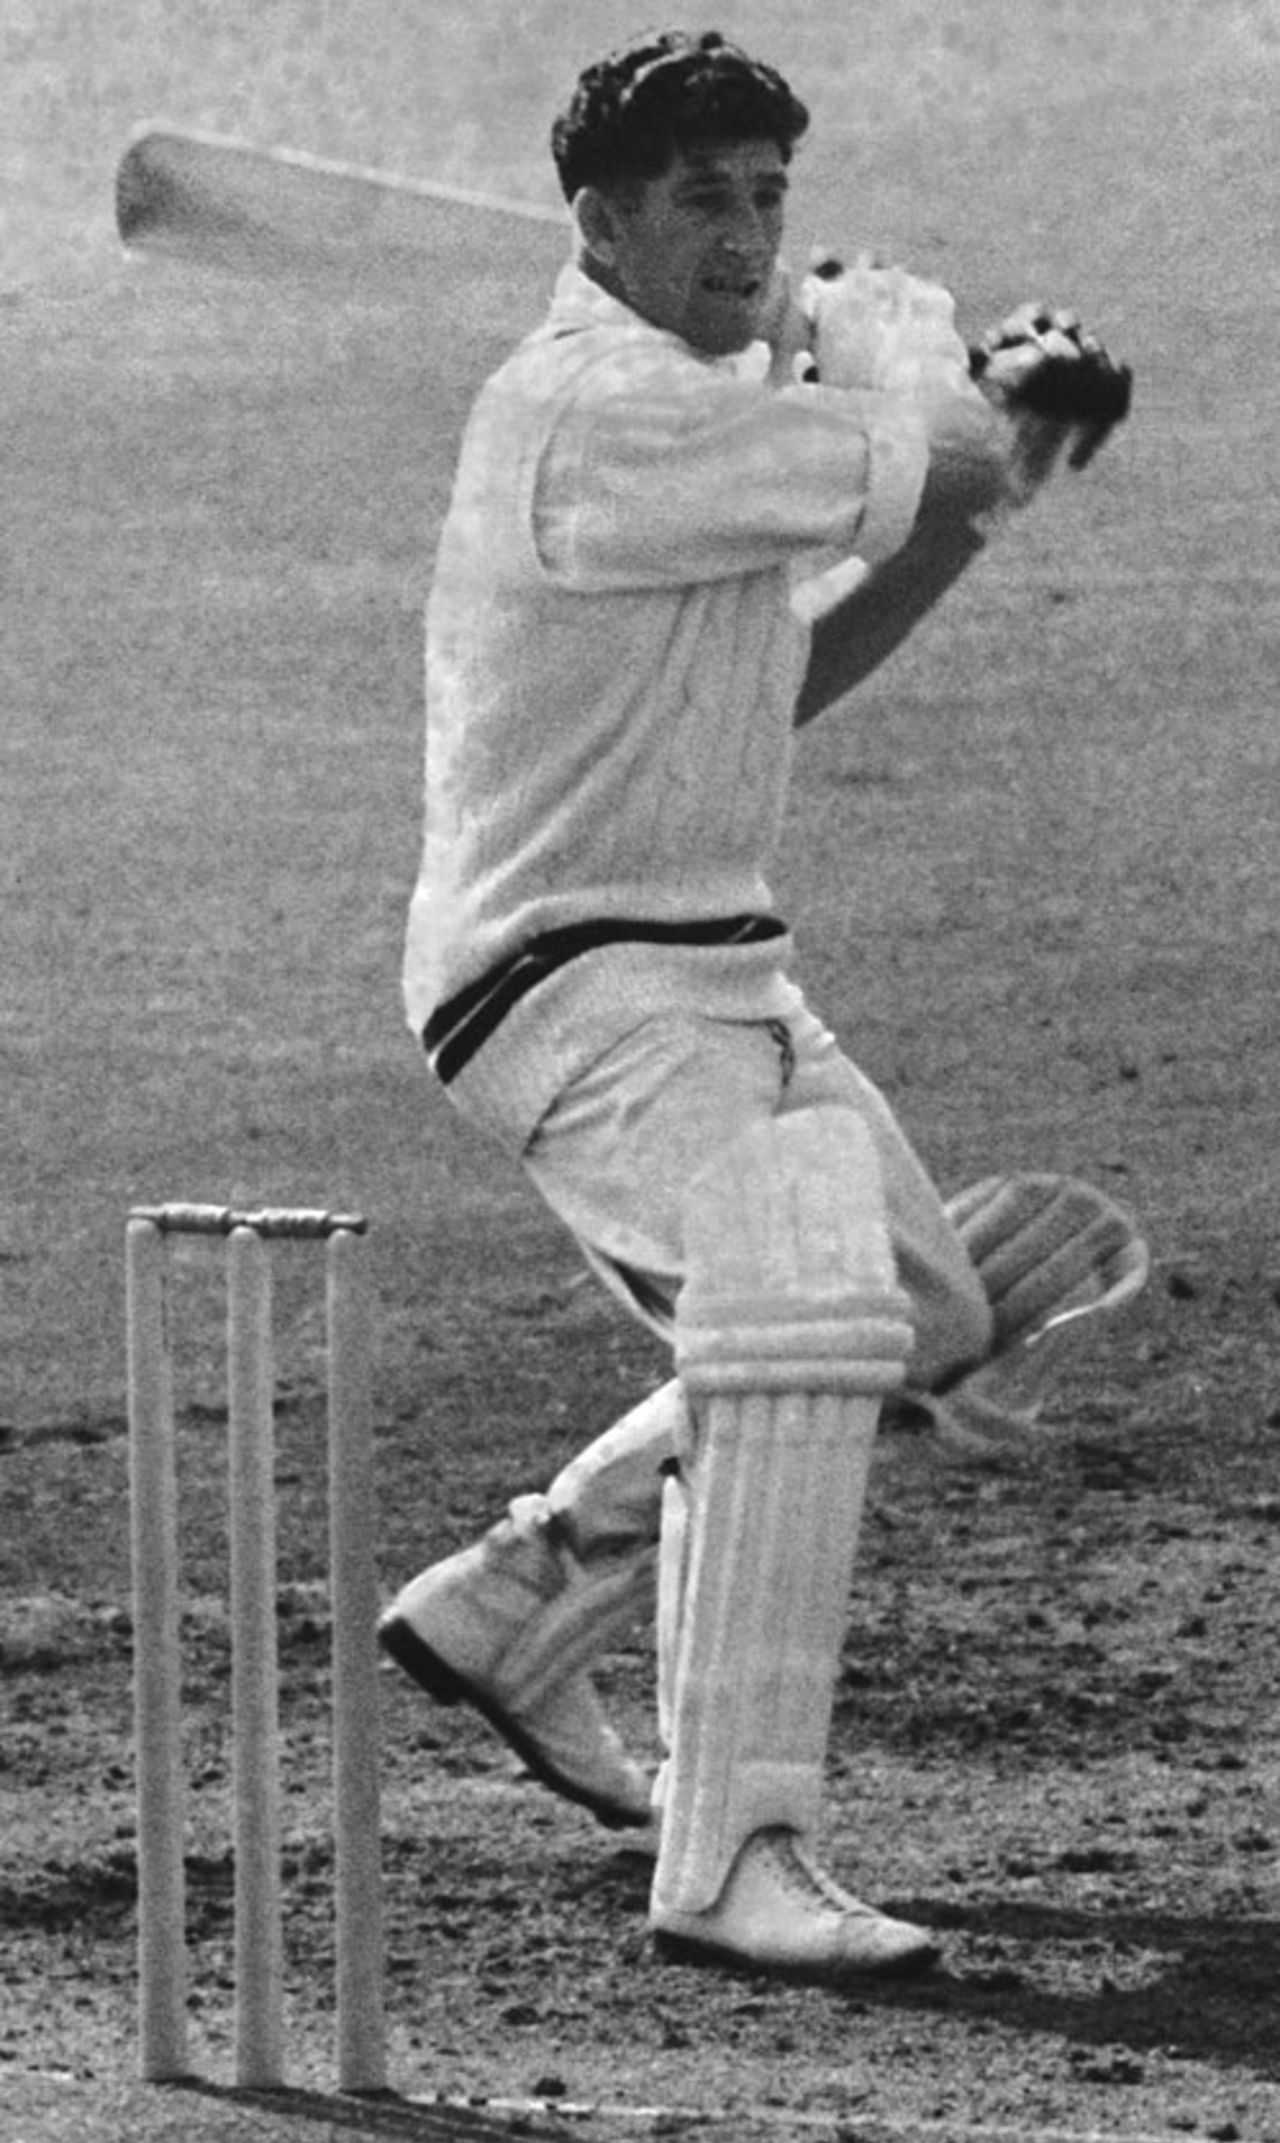 Ken Barrington plays the cut shot, Surrey v Worcestershire, County Championship, The Oval, June 29, 1955